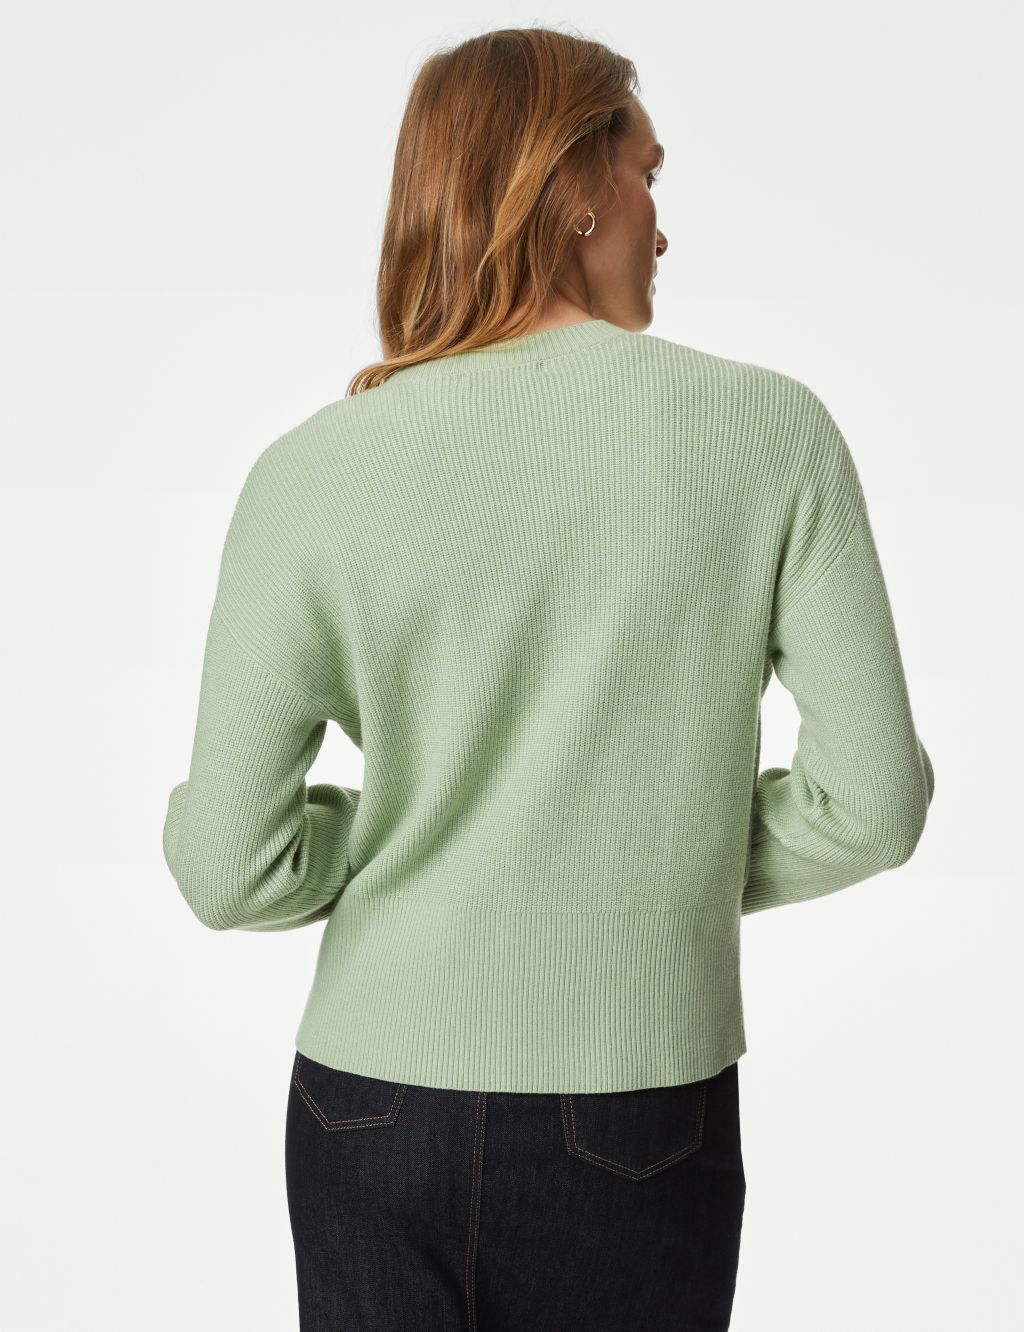 Soft Touch Textured Crew Neck Jumper image 5